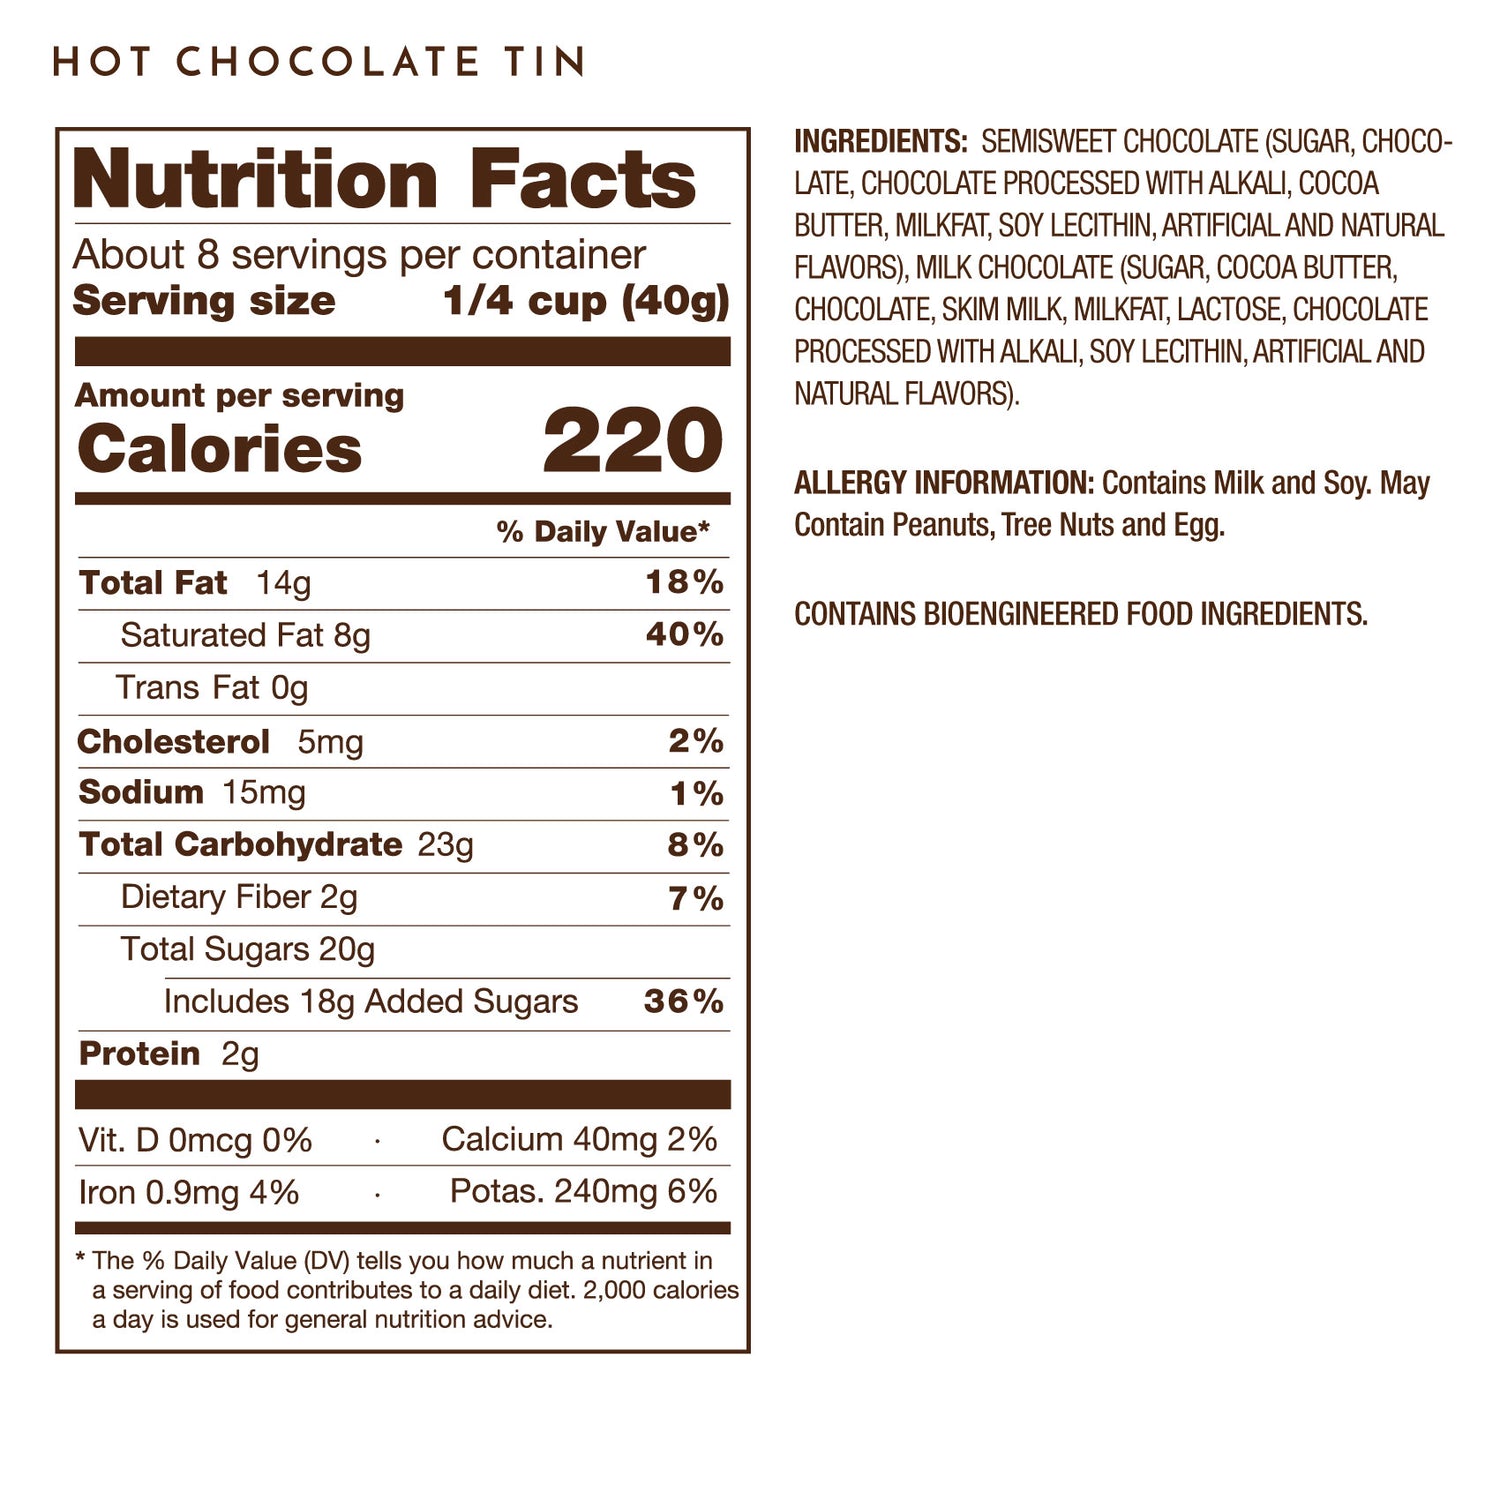 Nutrition Facts - Please call 1-800-438-4356 for more information.